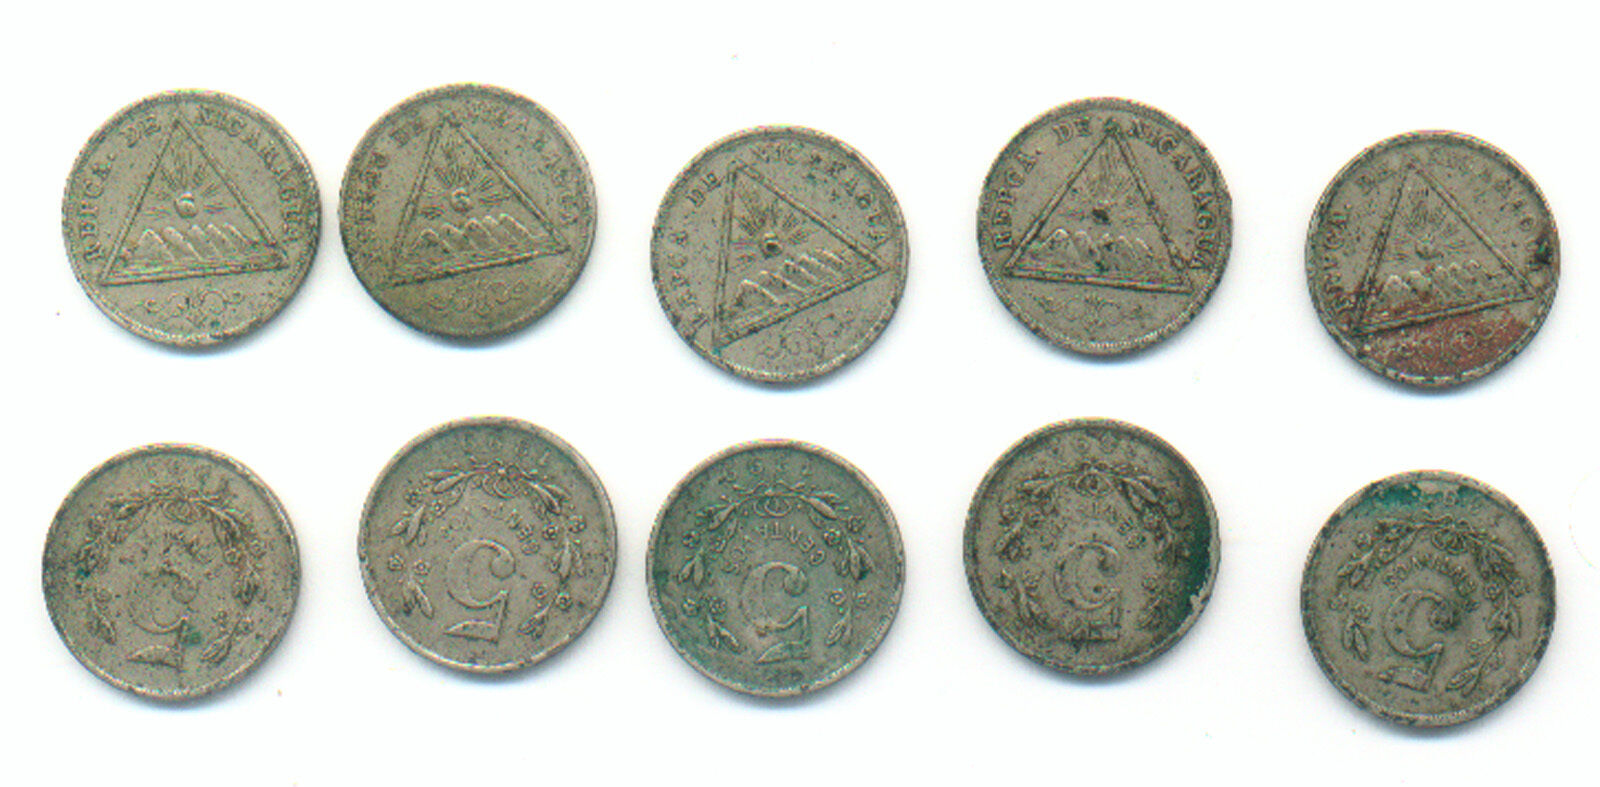 WHOLESALE NICARAGUA KM # 9 of 1899 TEN ( 10 ) CIRC COINS with TRIANGLE EMBLEM